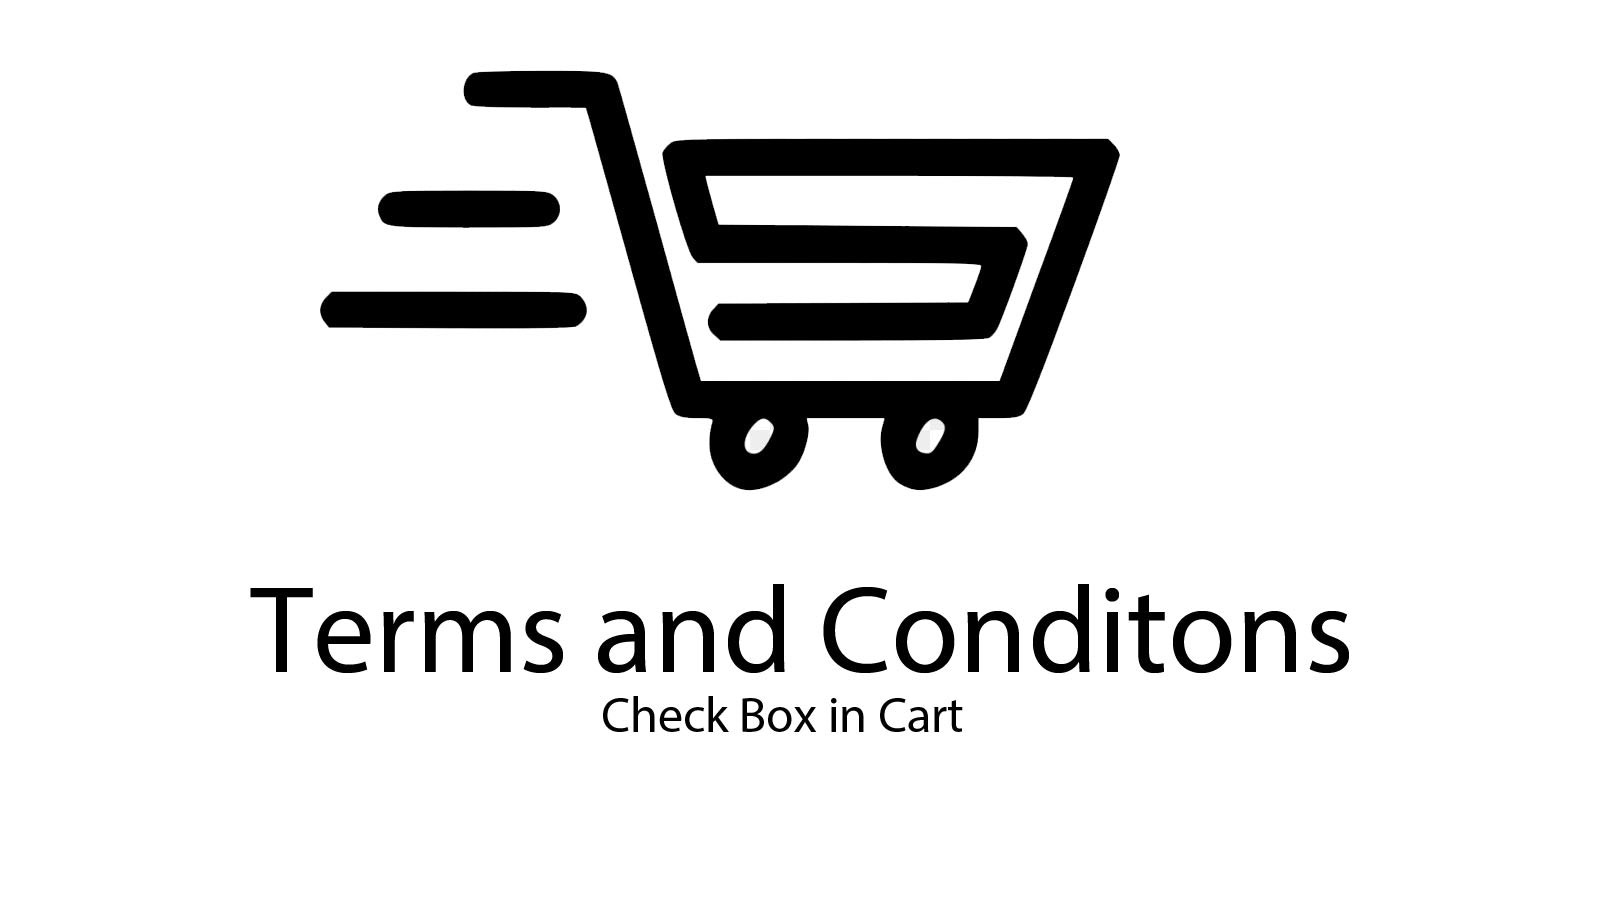 Elite Terms and Conditions Shopify应用